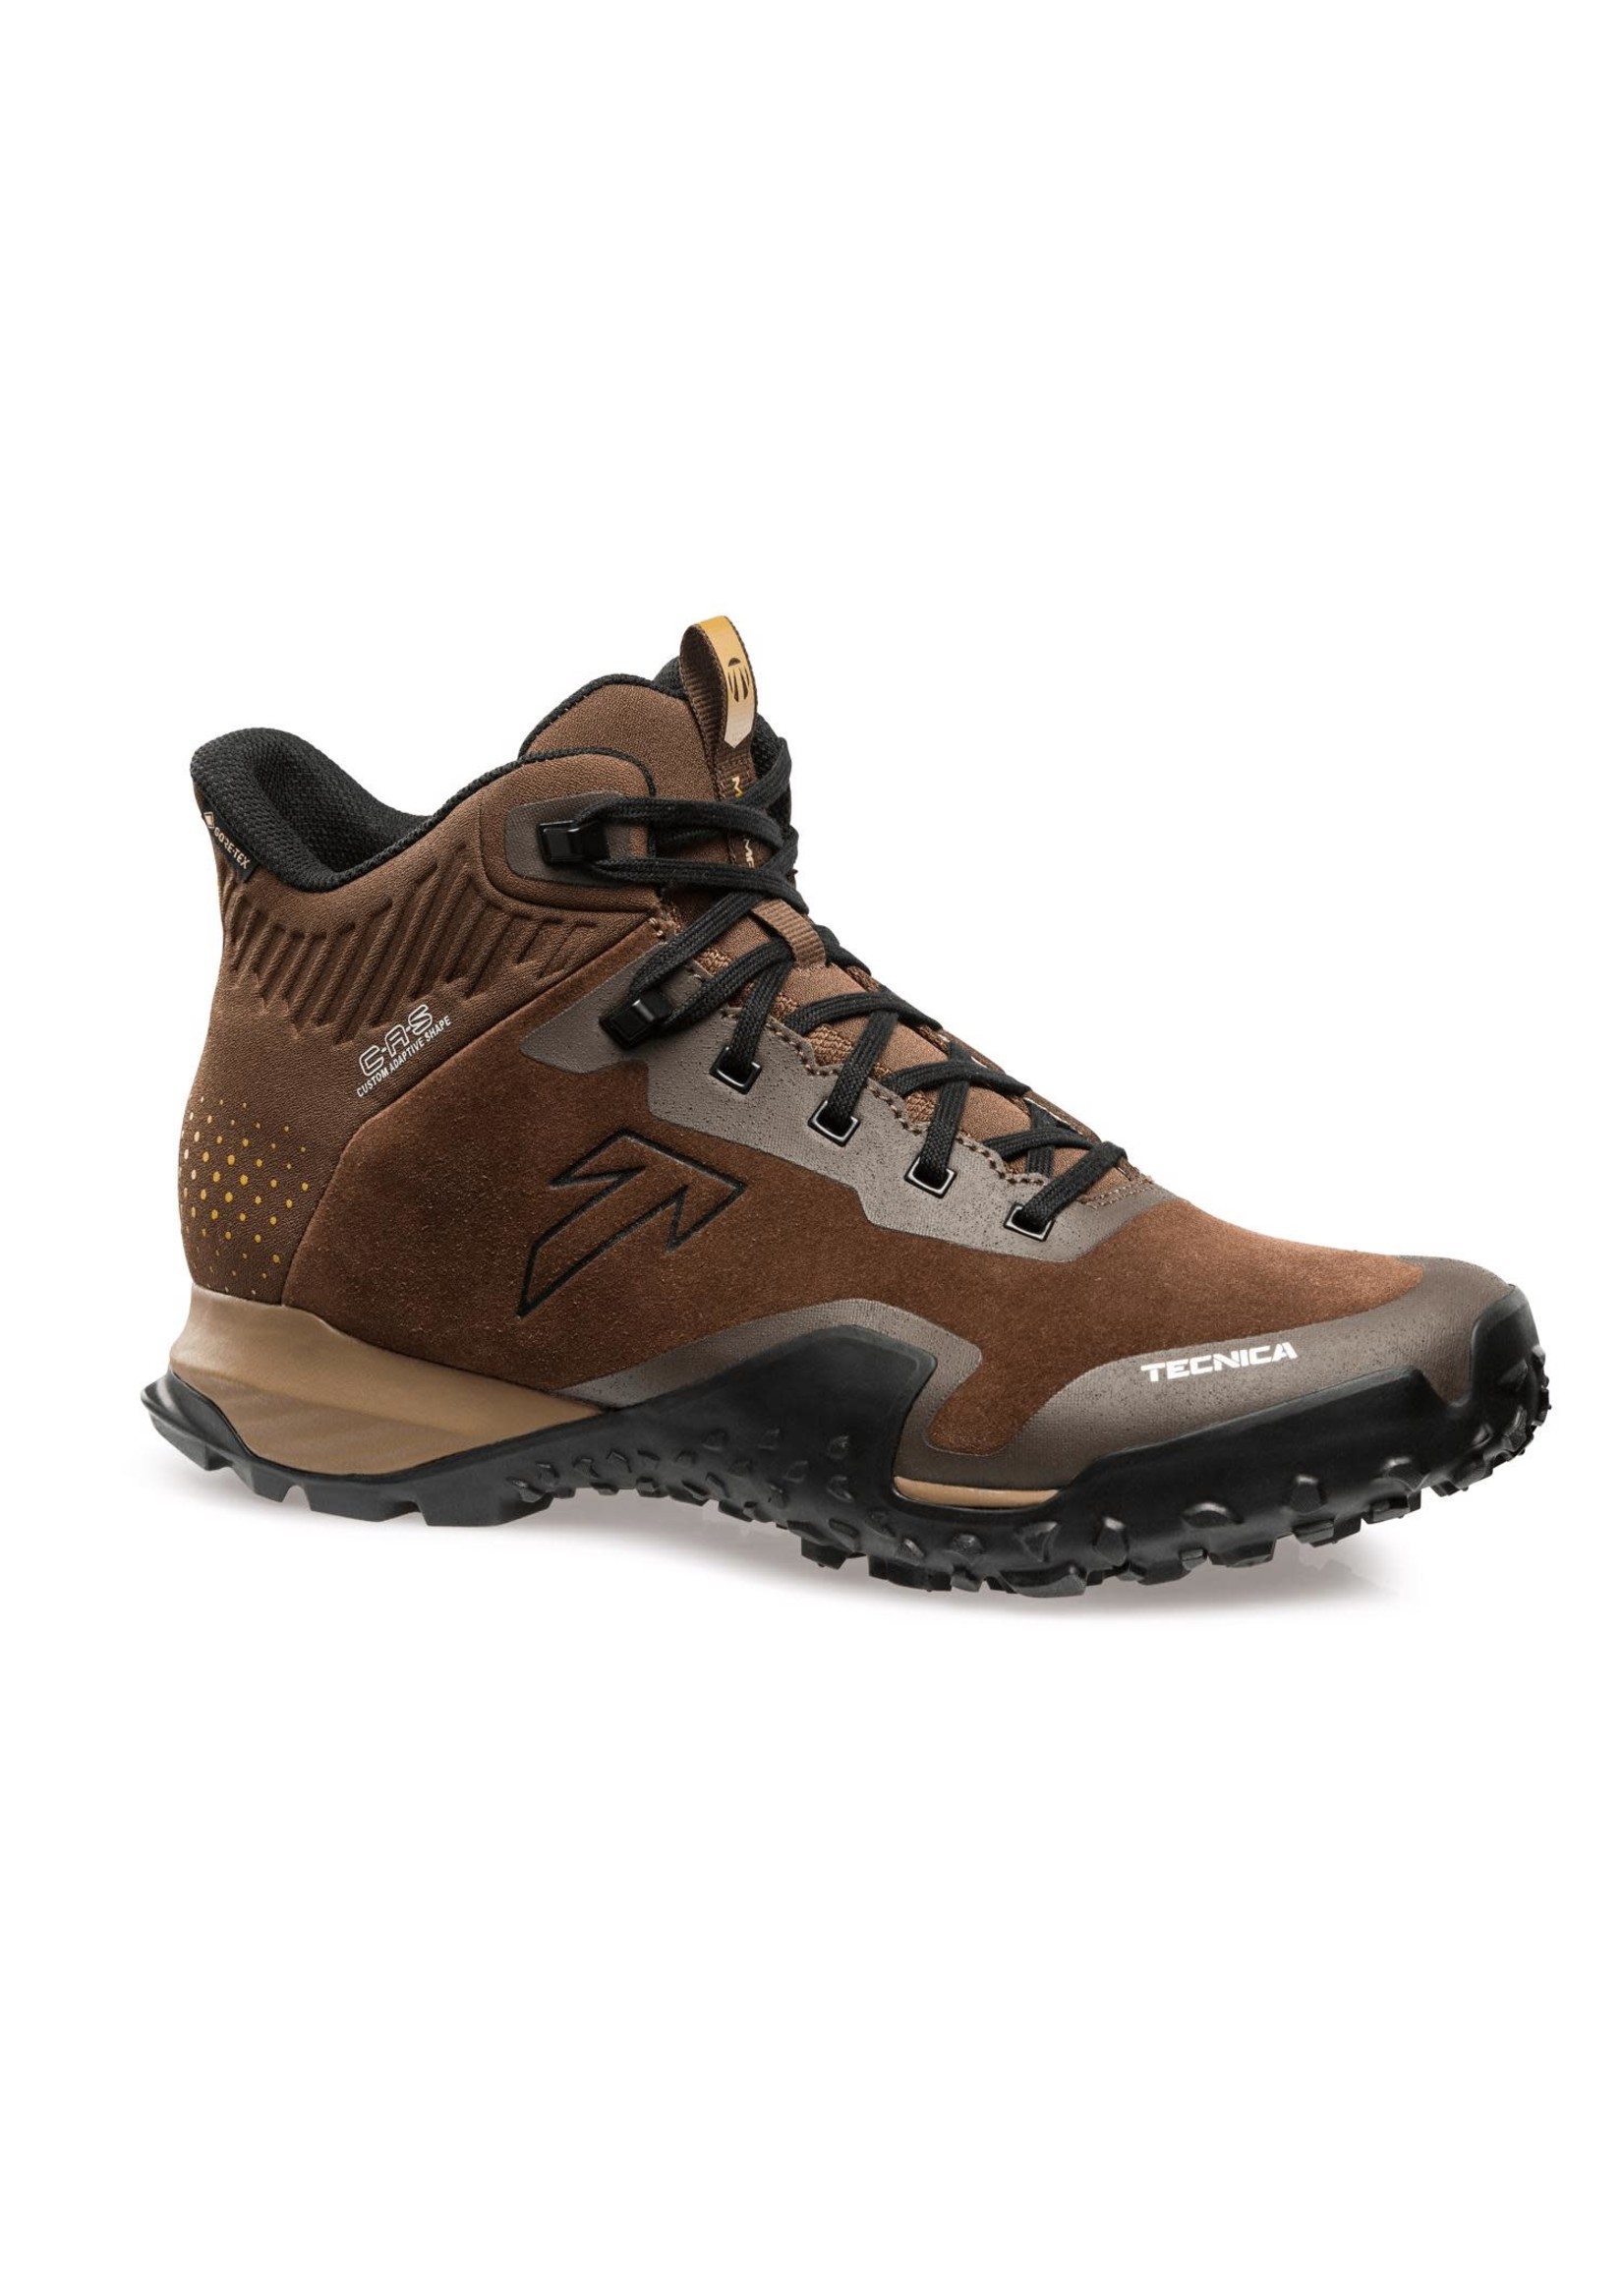 Tecnica Chaussure Tecnica Magma Mid GTX - Homme